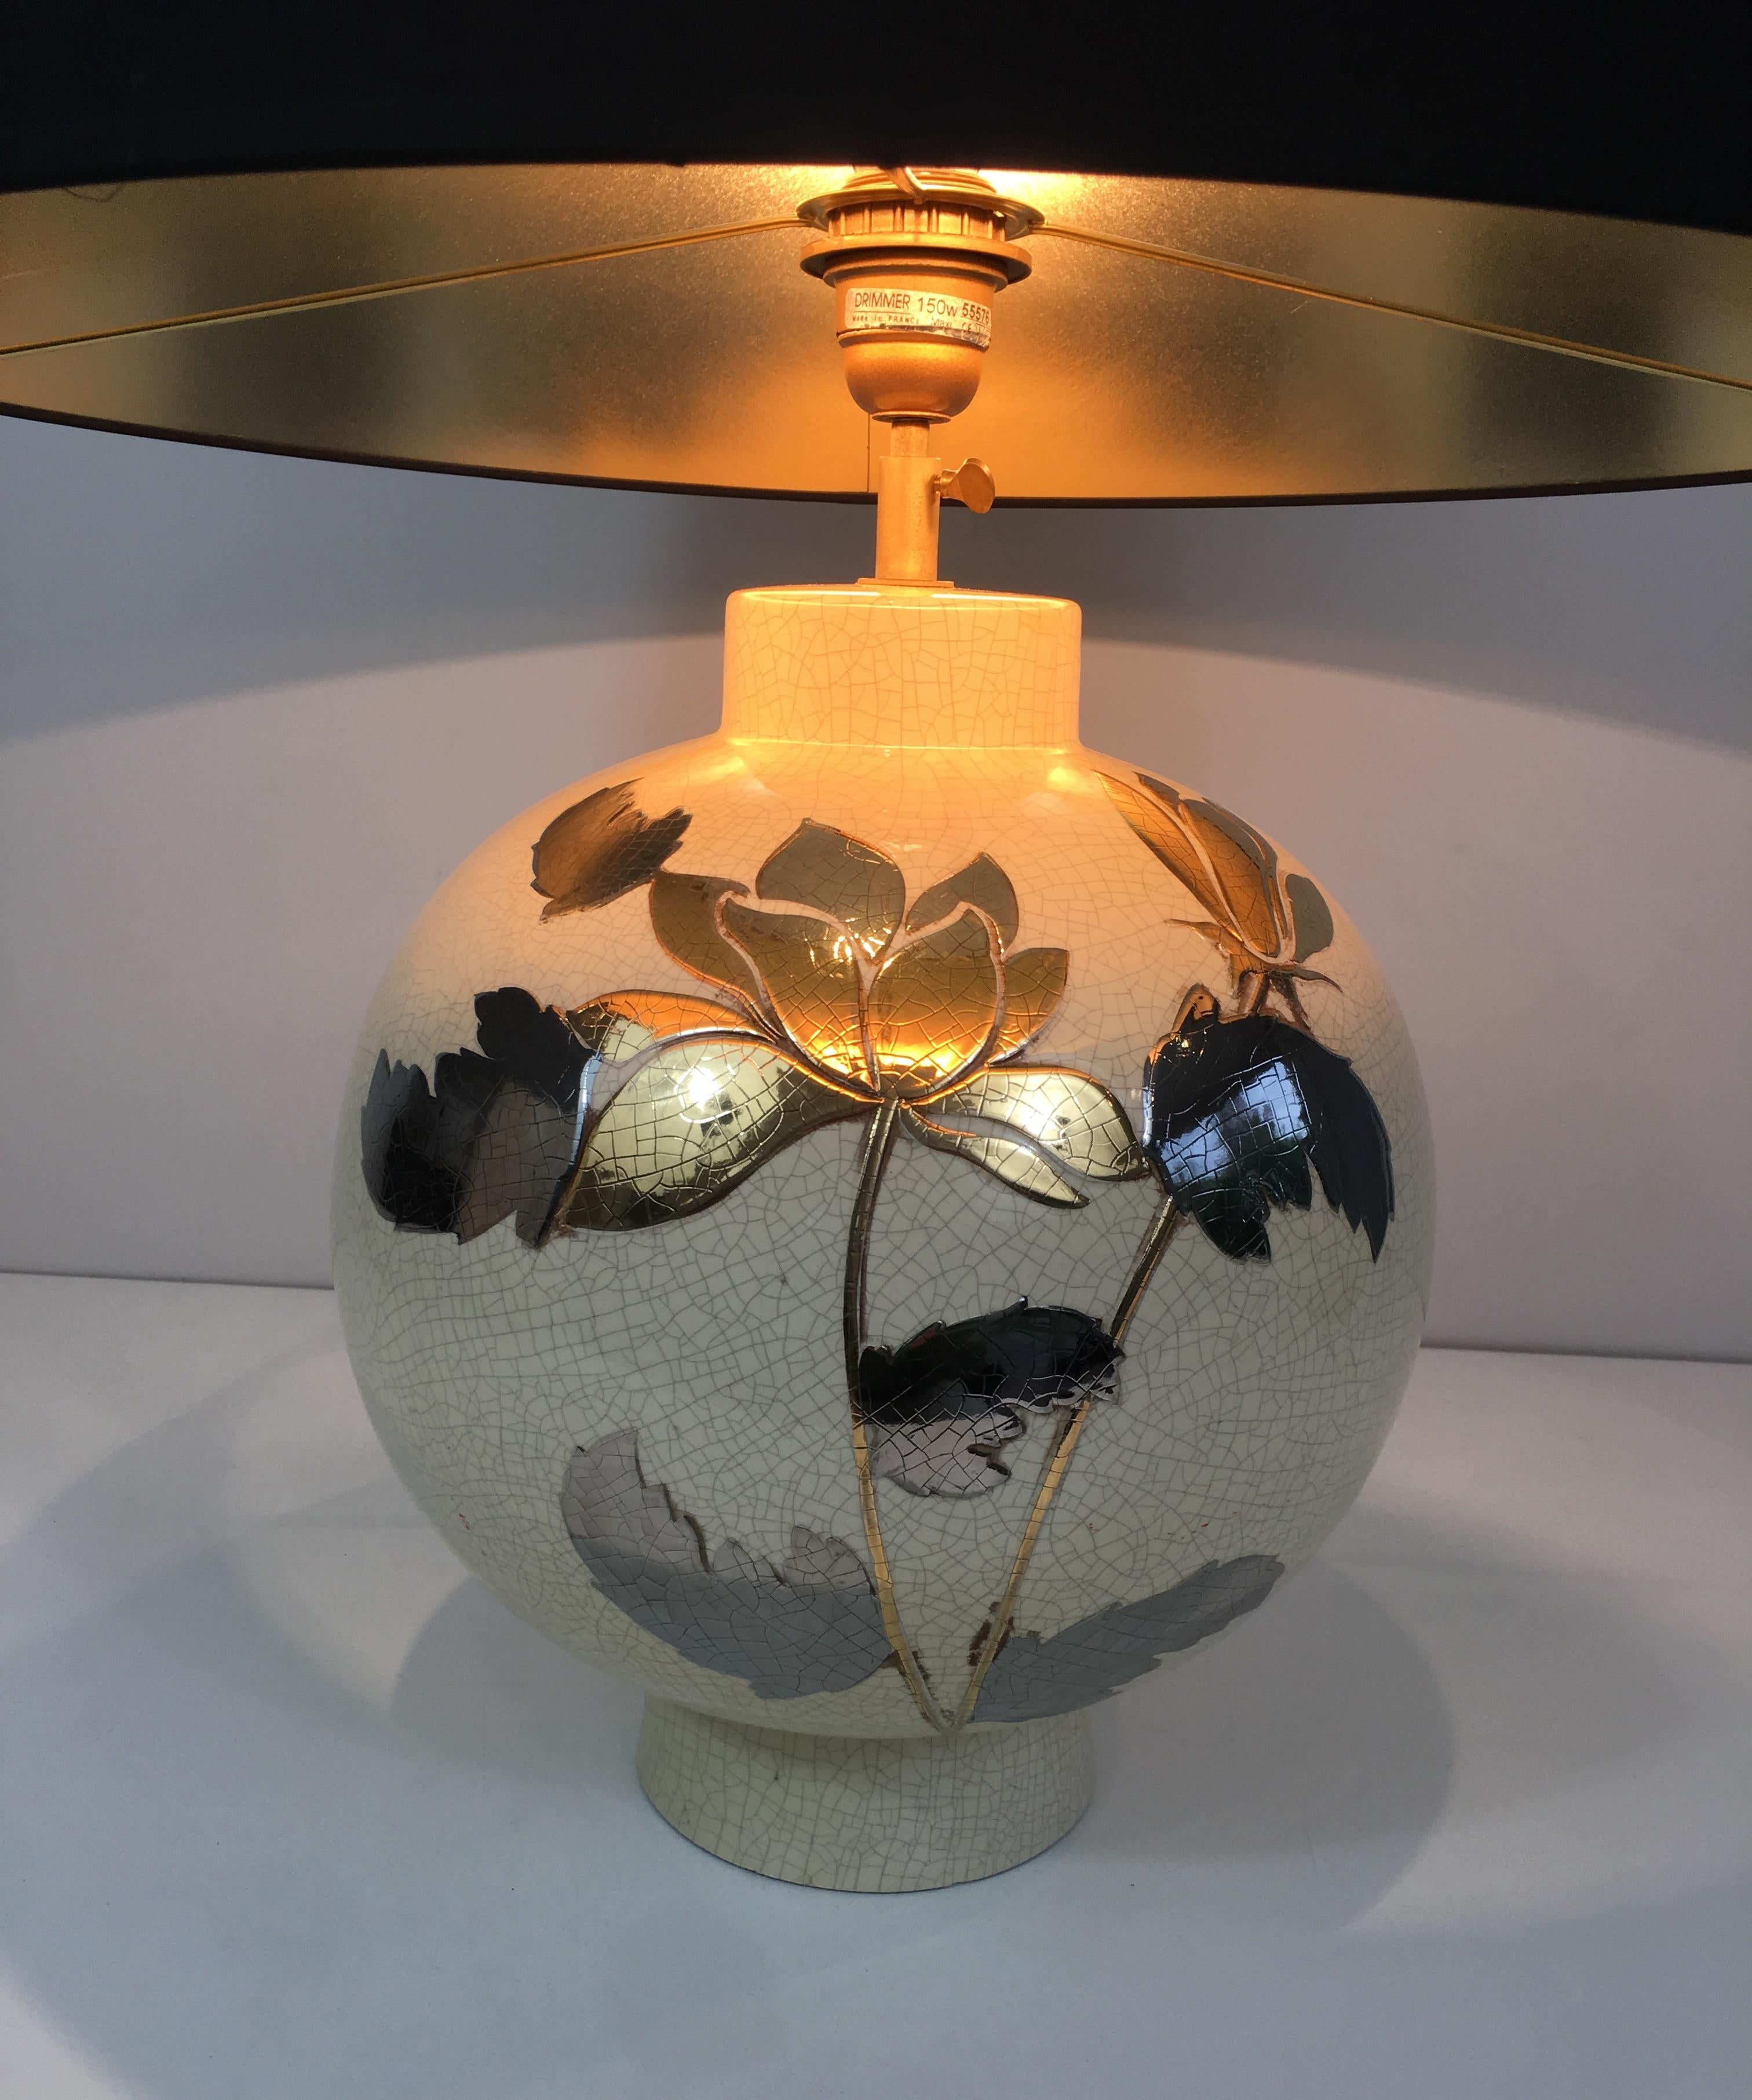 By L Drummer, Cracked Ceramic Lamp with Silver and Gold Flower Decoration on the 5